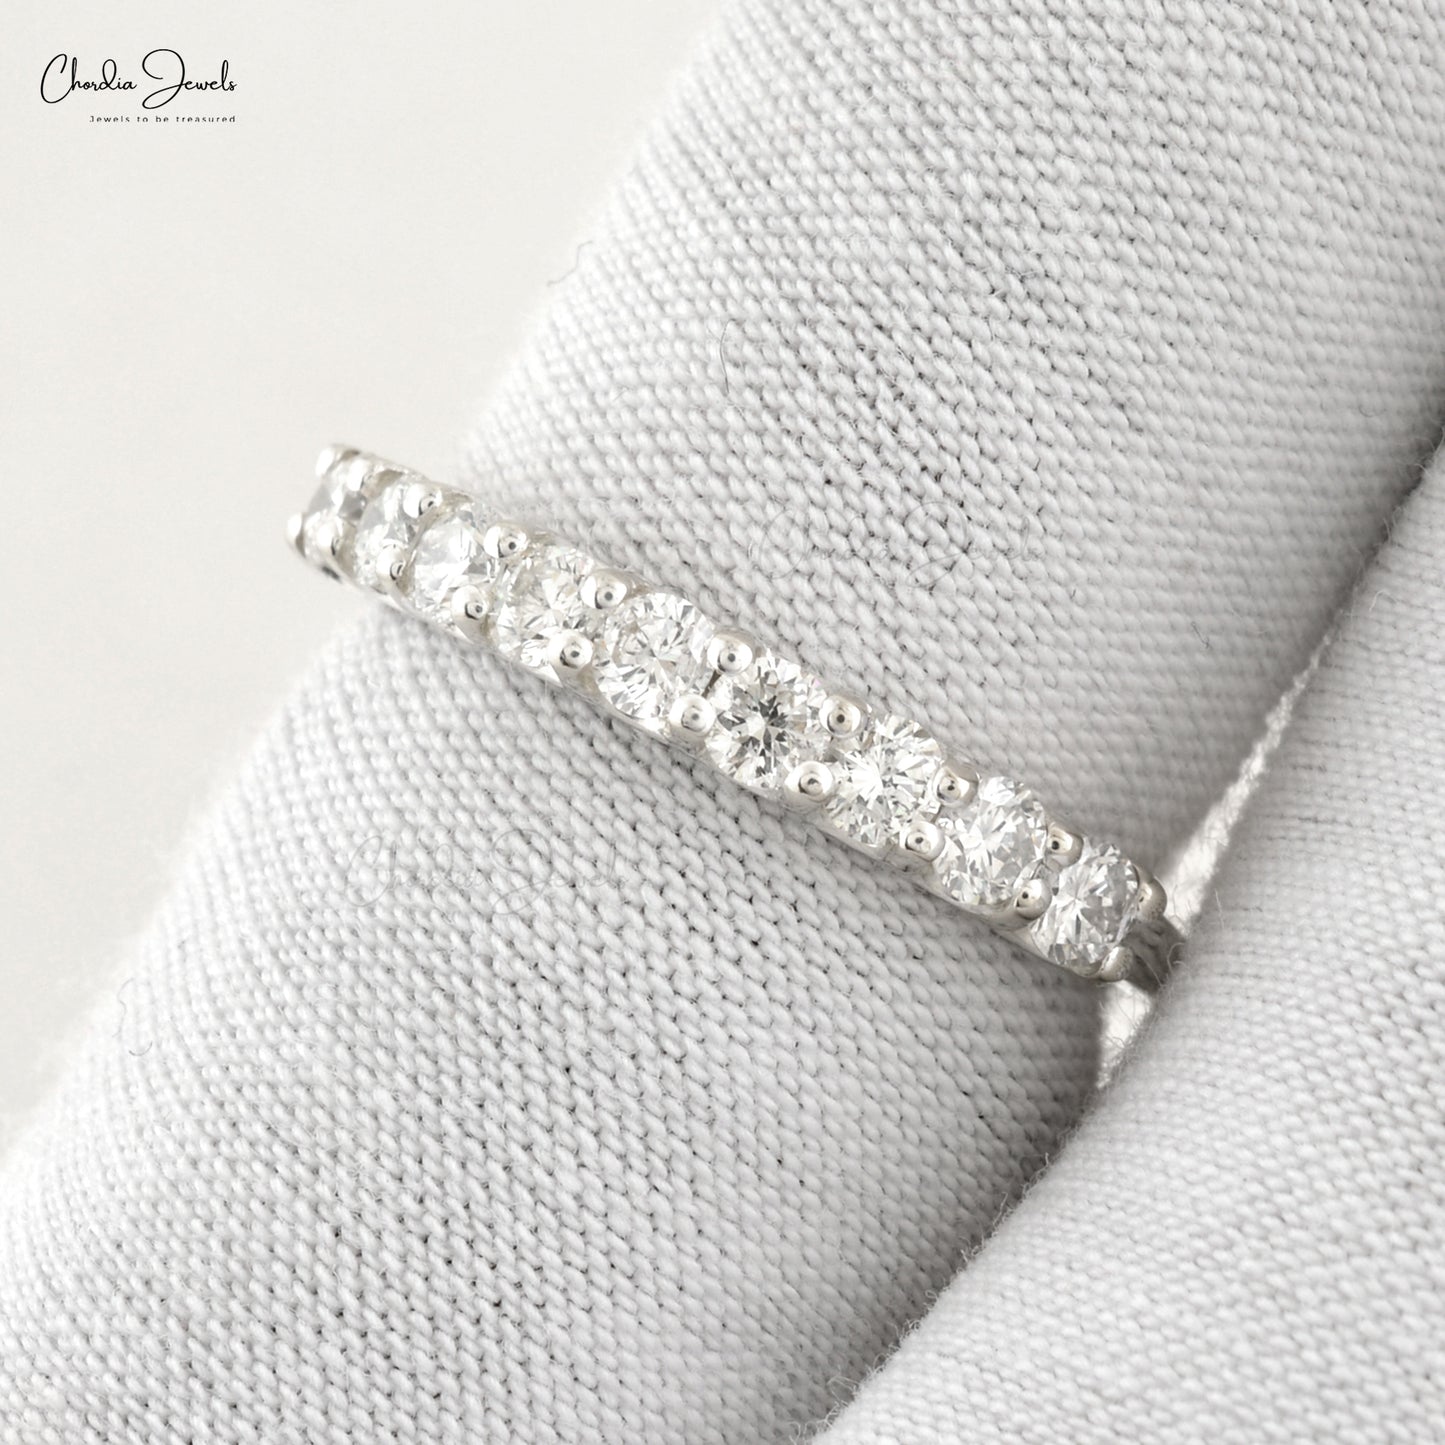 Beautiful jewelry Certified Authentic SI Quality Diamond Half Eternity Band Ring in 14k Solid White Gold Anniversary Gift For Wife